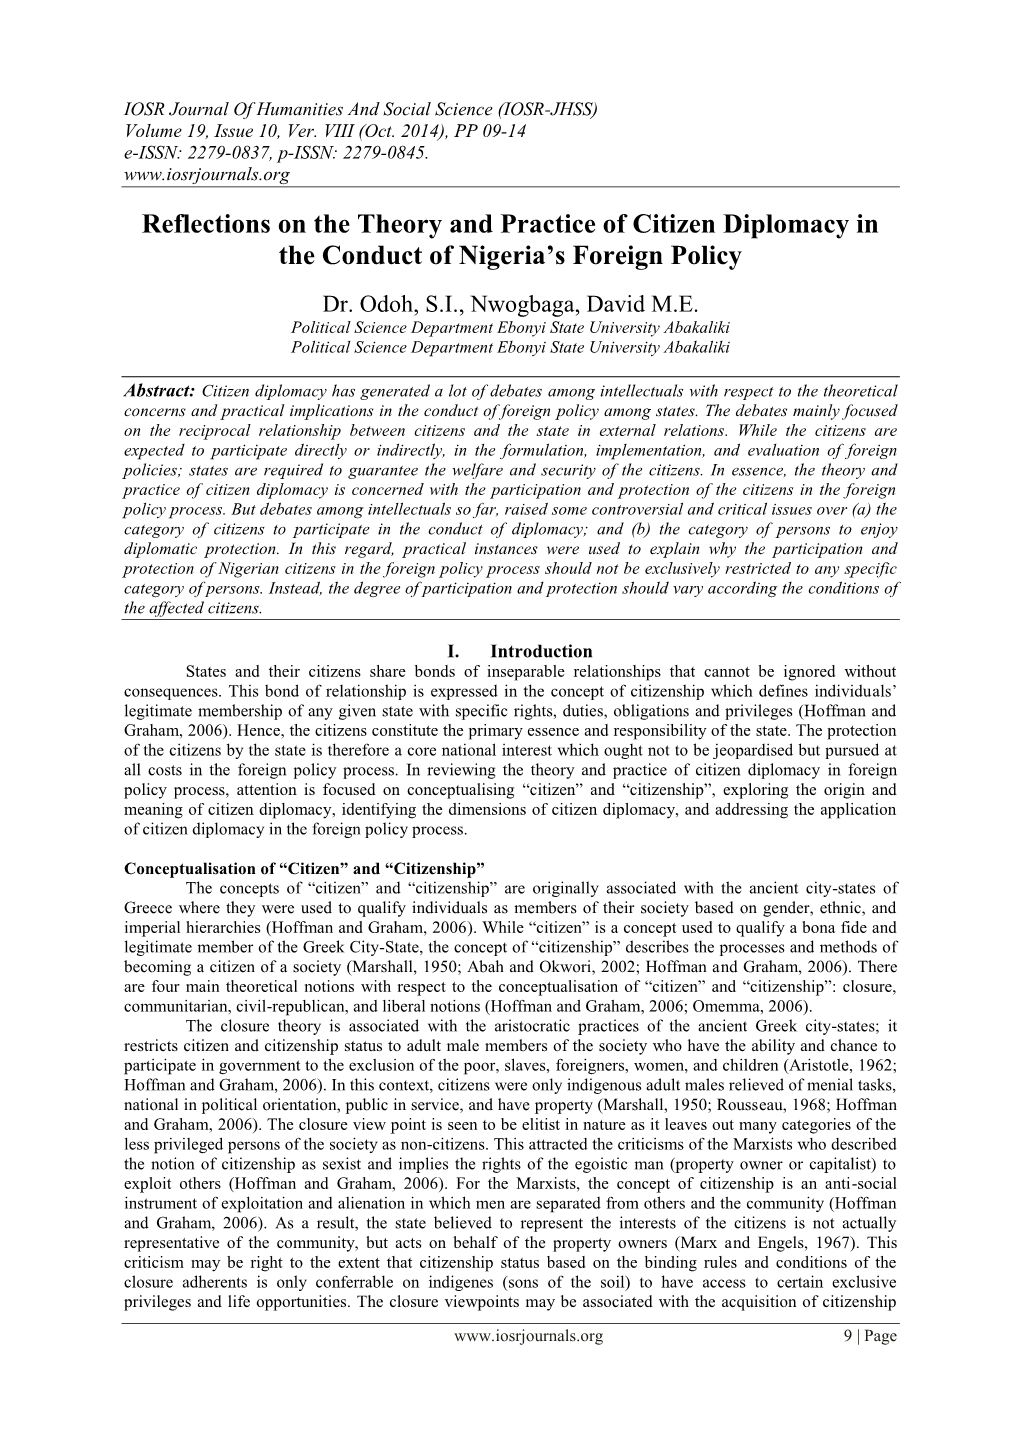 Reflections on the Theory and Practice of Citizen Diplomacy in the Conduct of Nigeria’S Foreign Policy